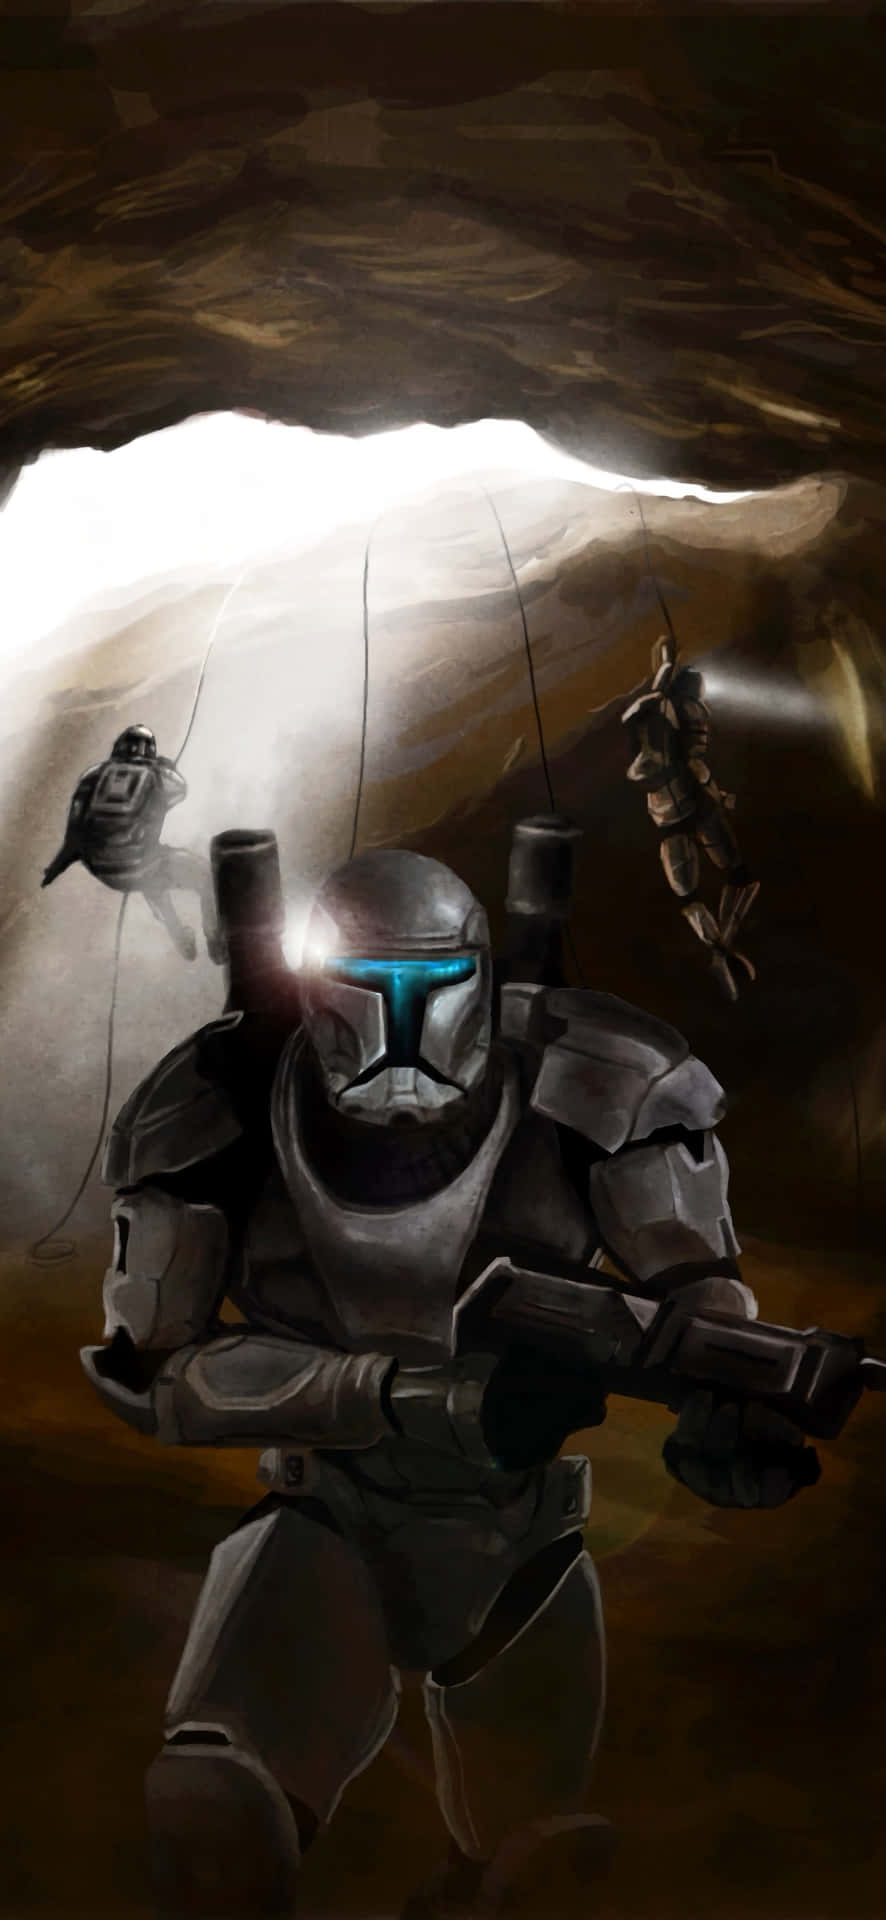 Command and Conquer: Play as an Elite Clone Trooper in Republic Commando Wallpaper